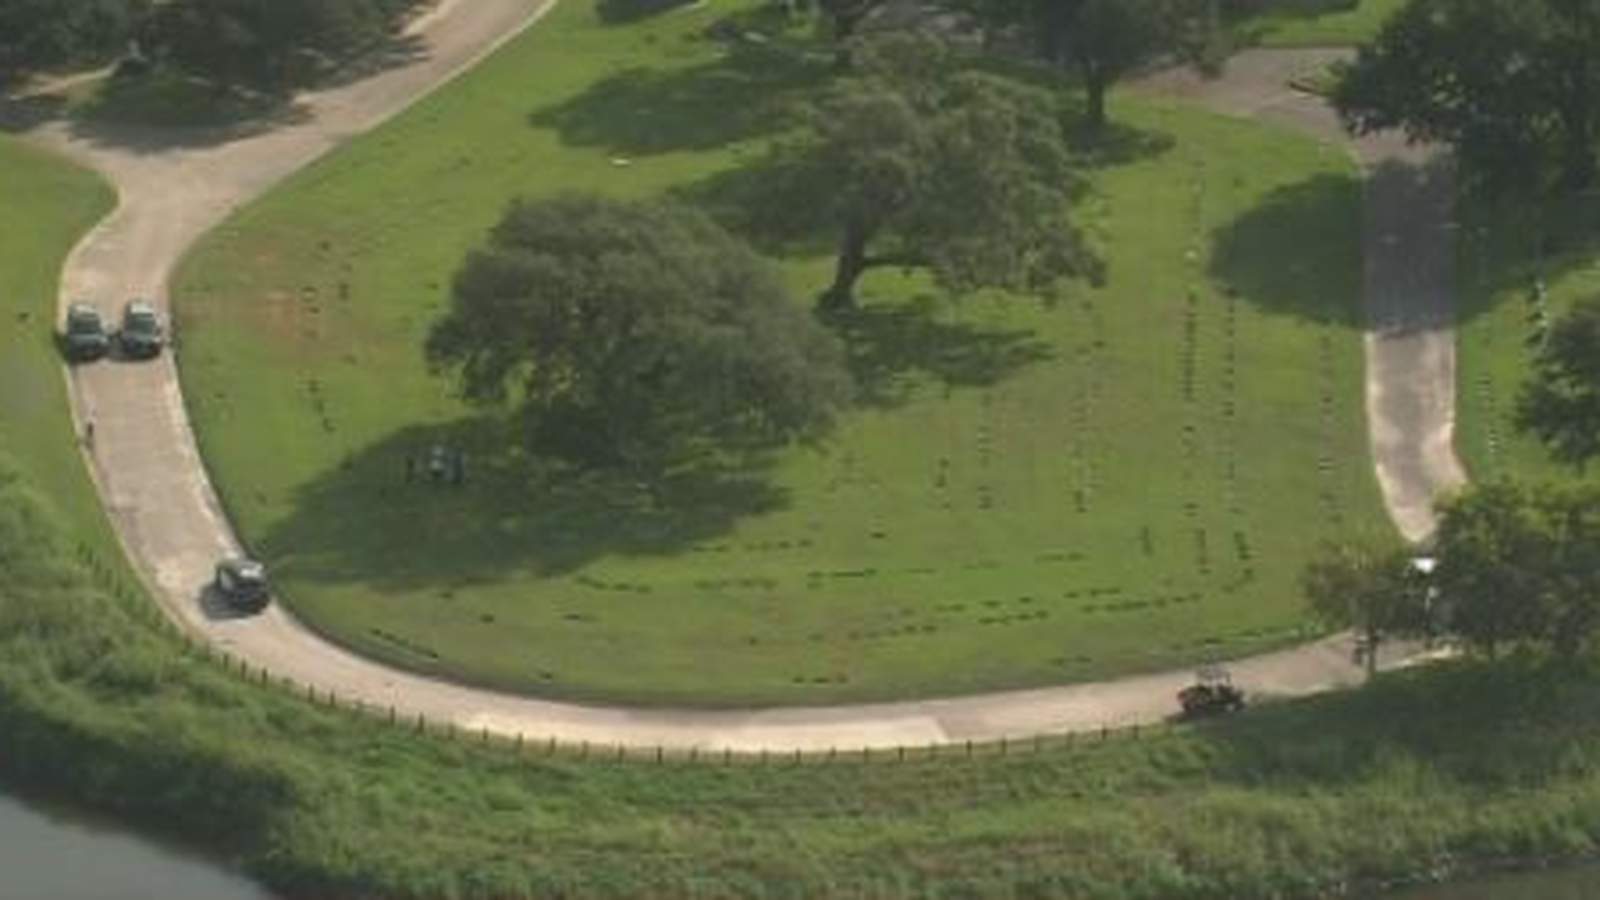 Man’s body recovered from Brays Bayou in southeast Houston, police say